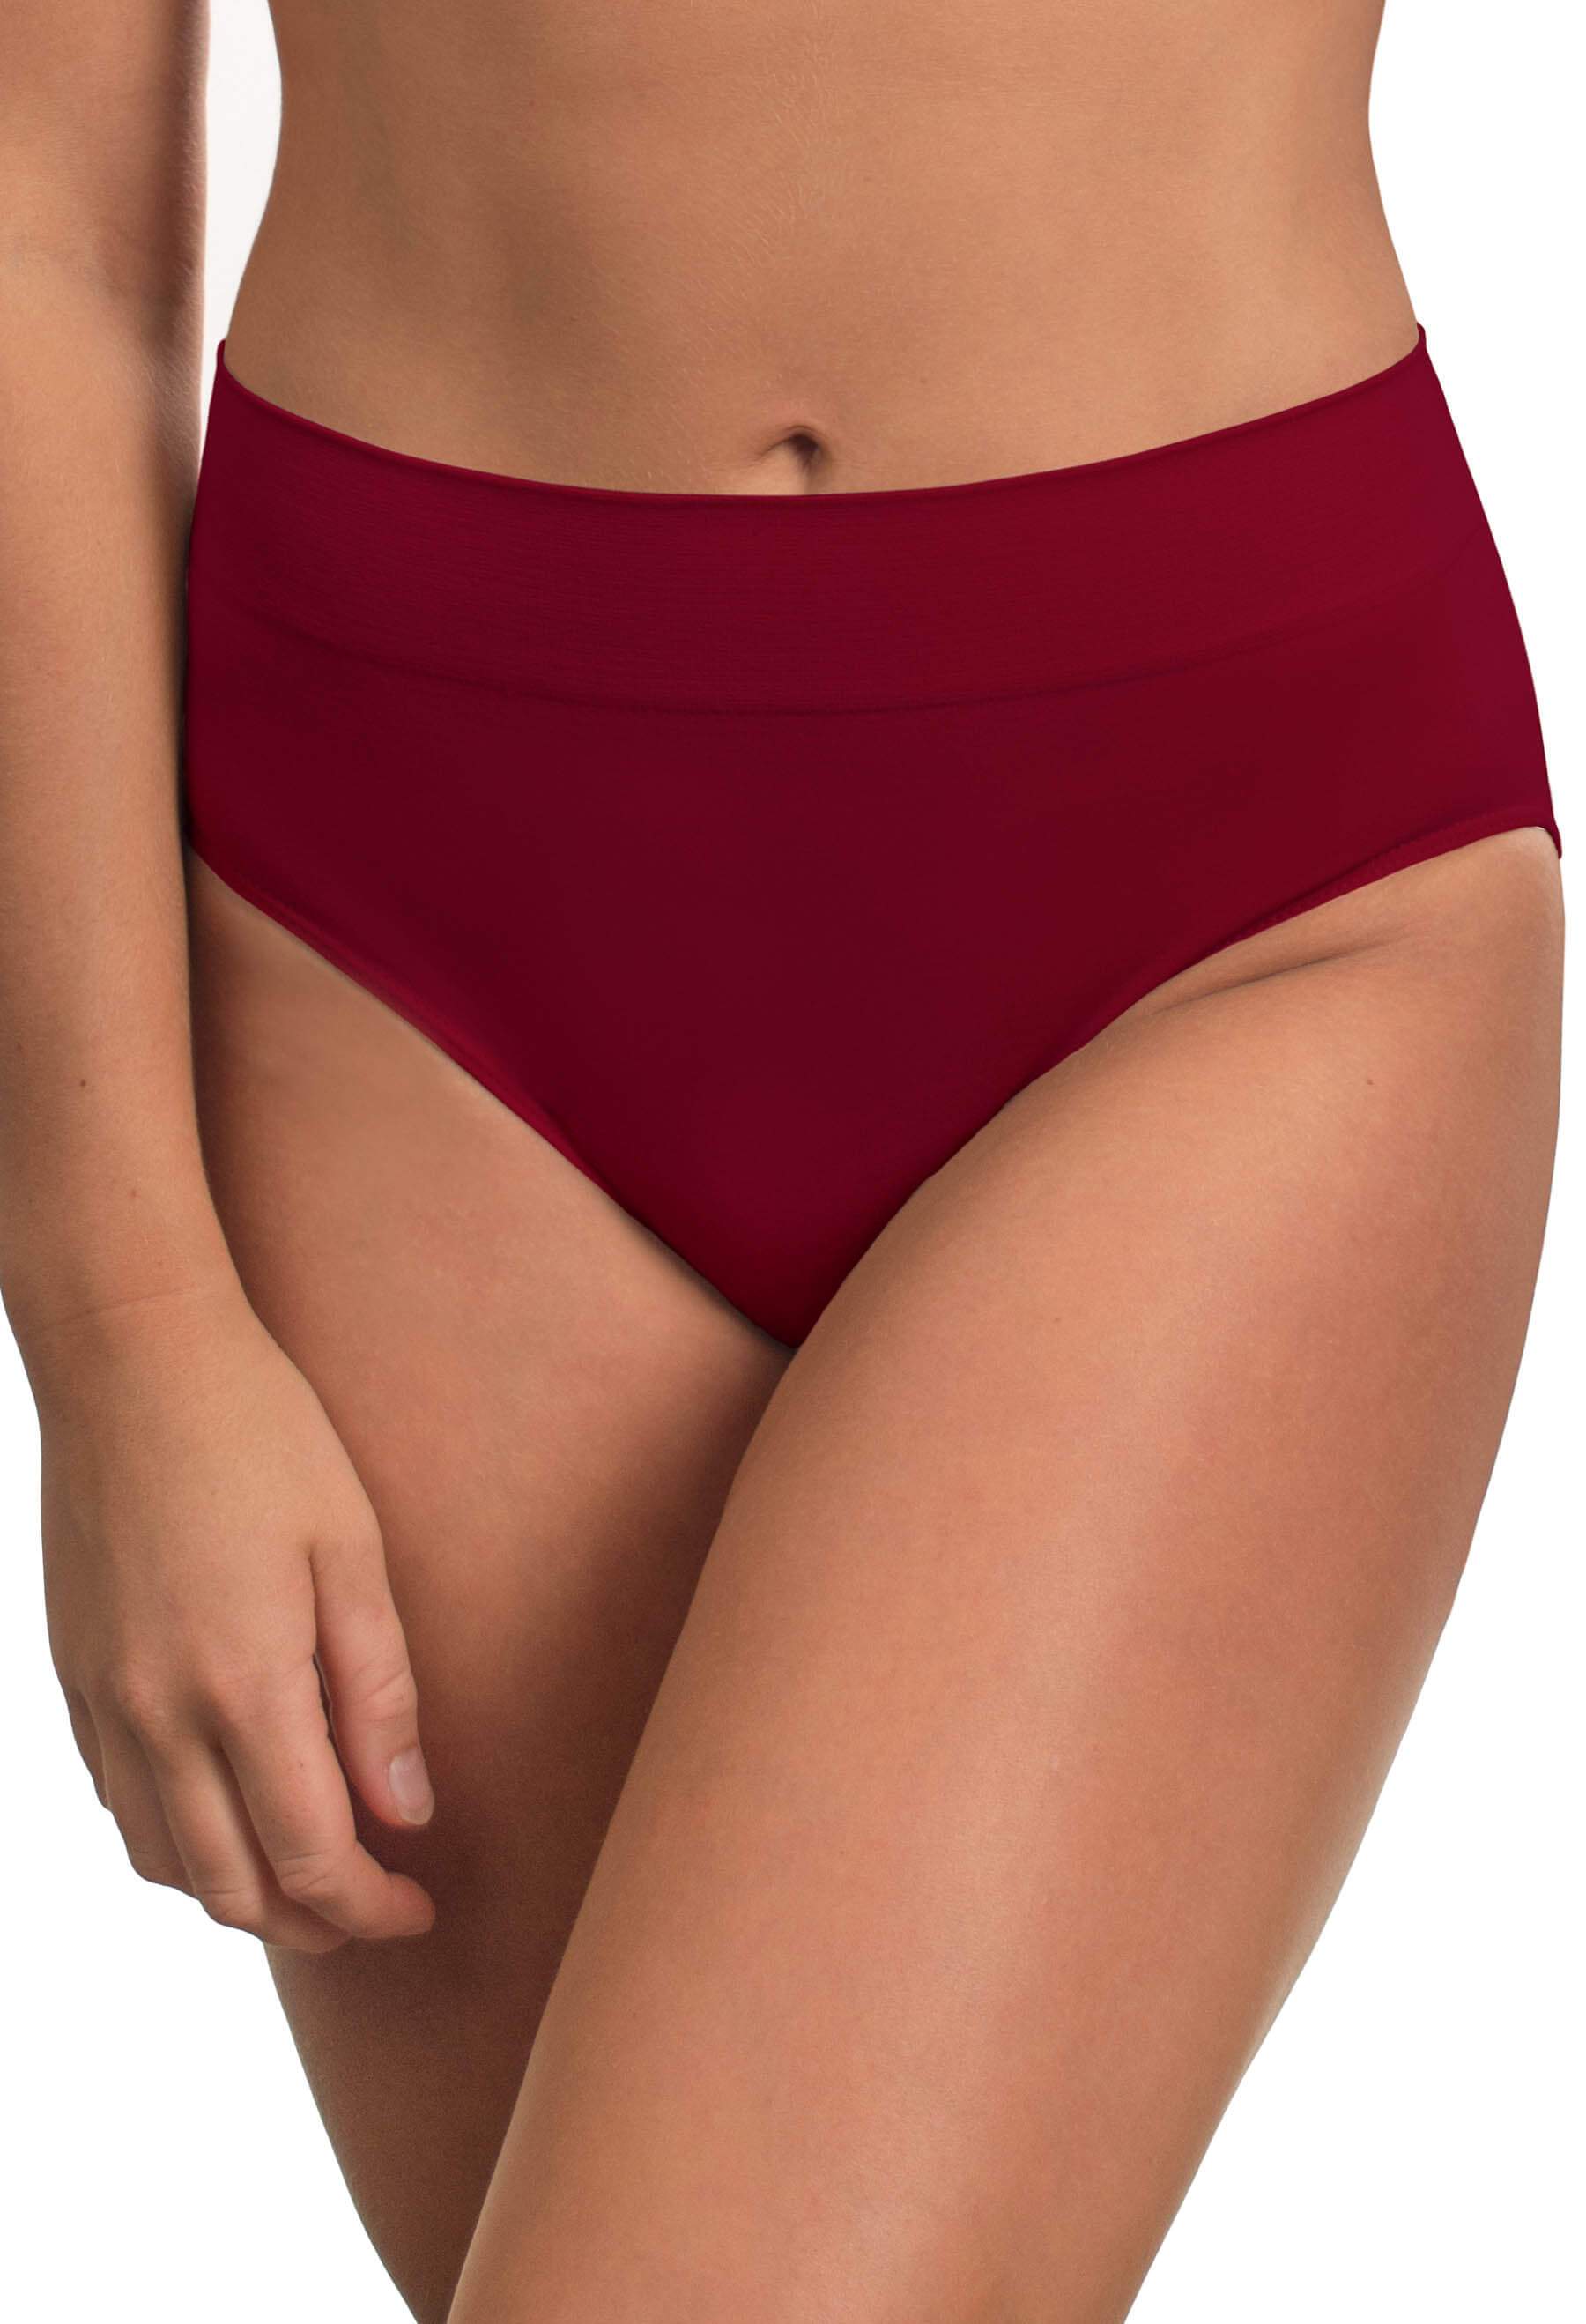 Wholesale maternity panty For Snug And Supportive Underwear 